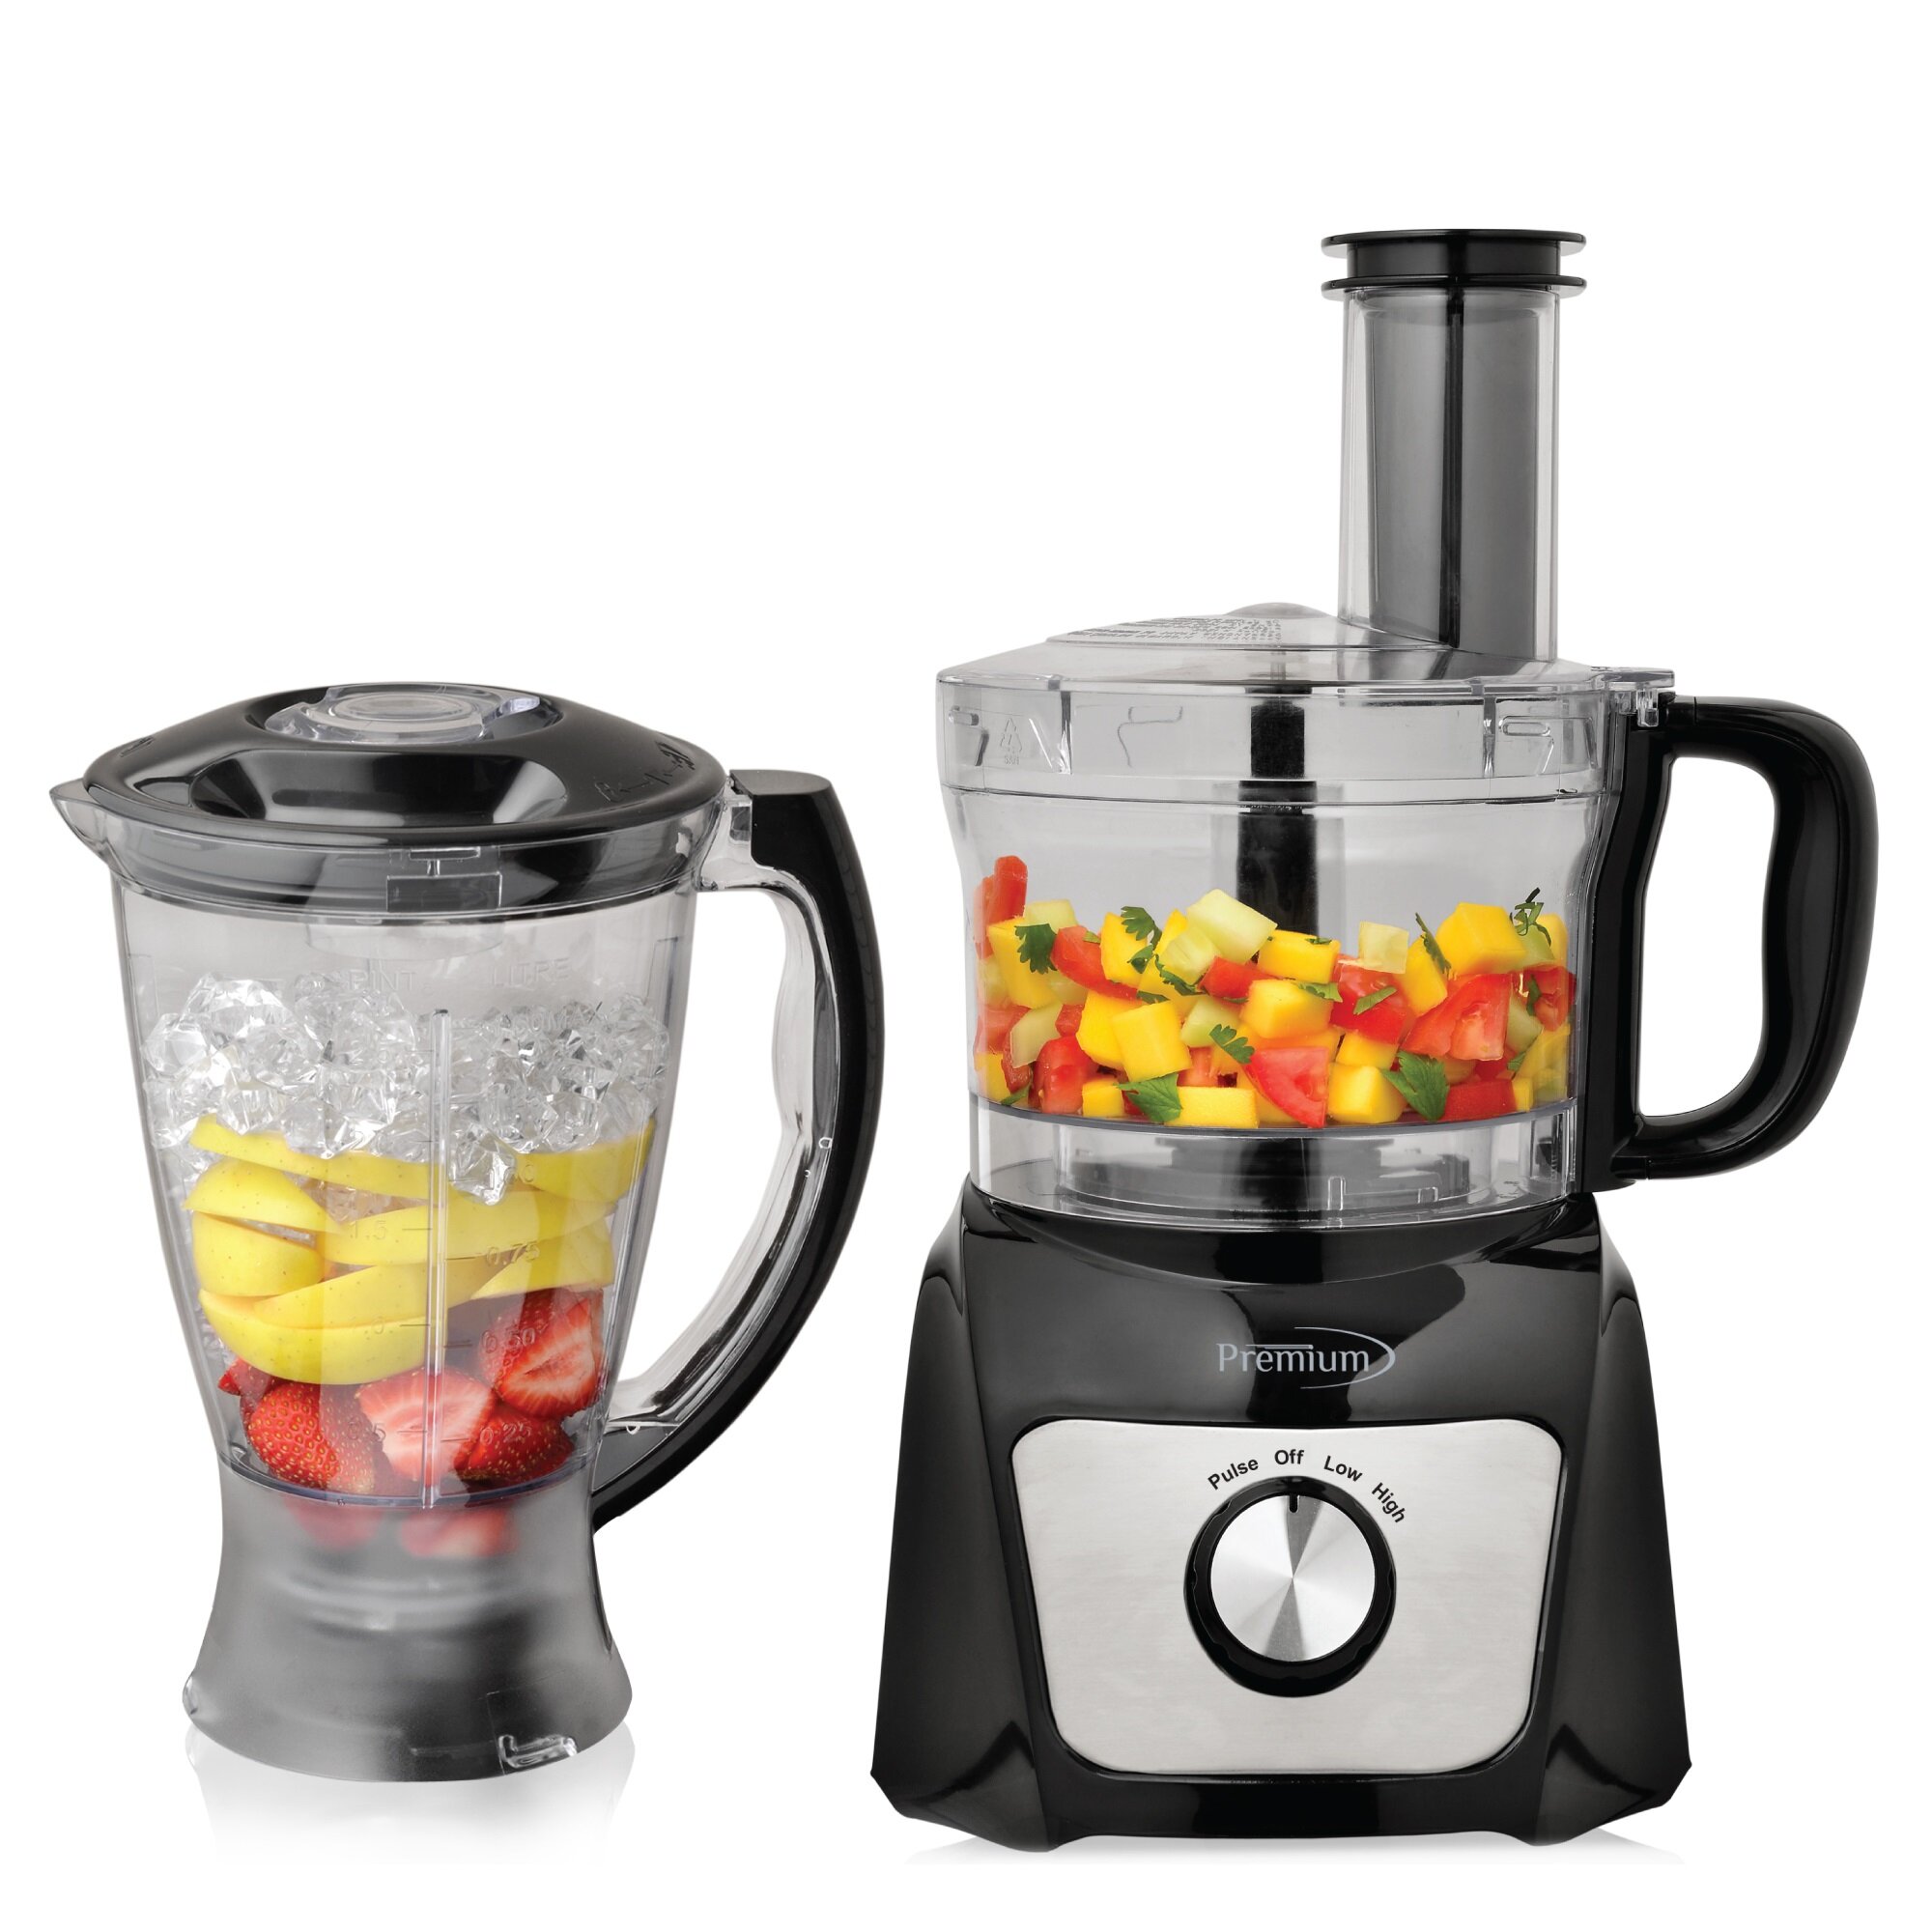 BPA FREE 500W Portable Personal Blender Mixer Food Processor With